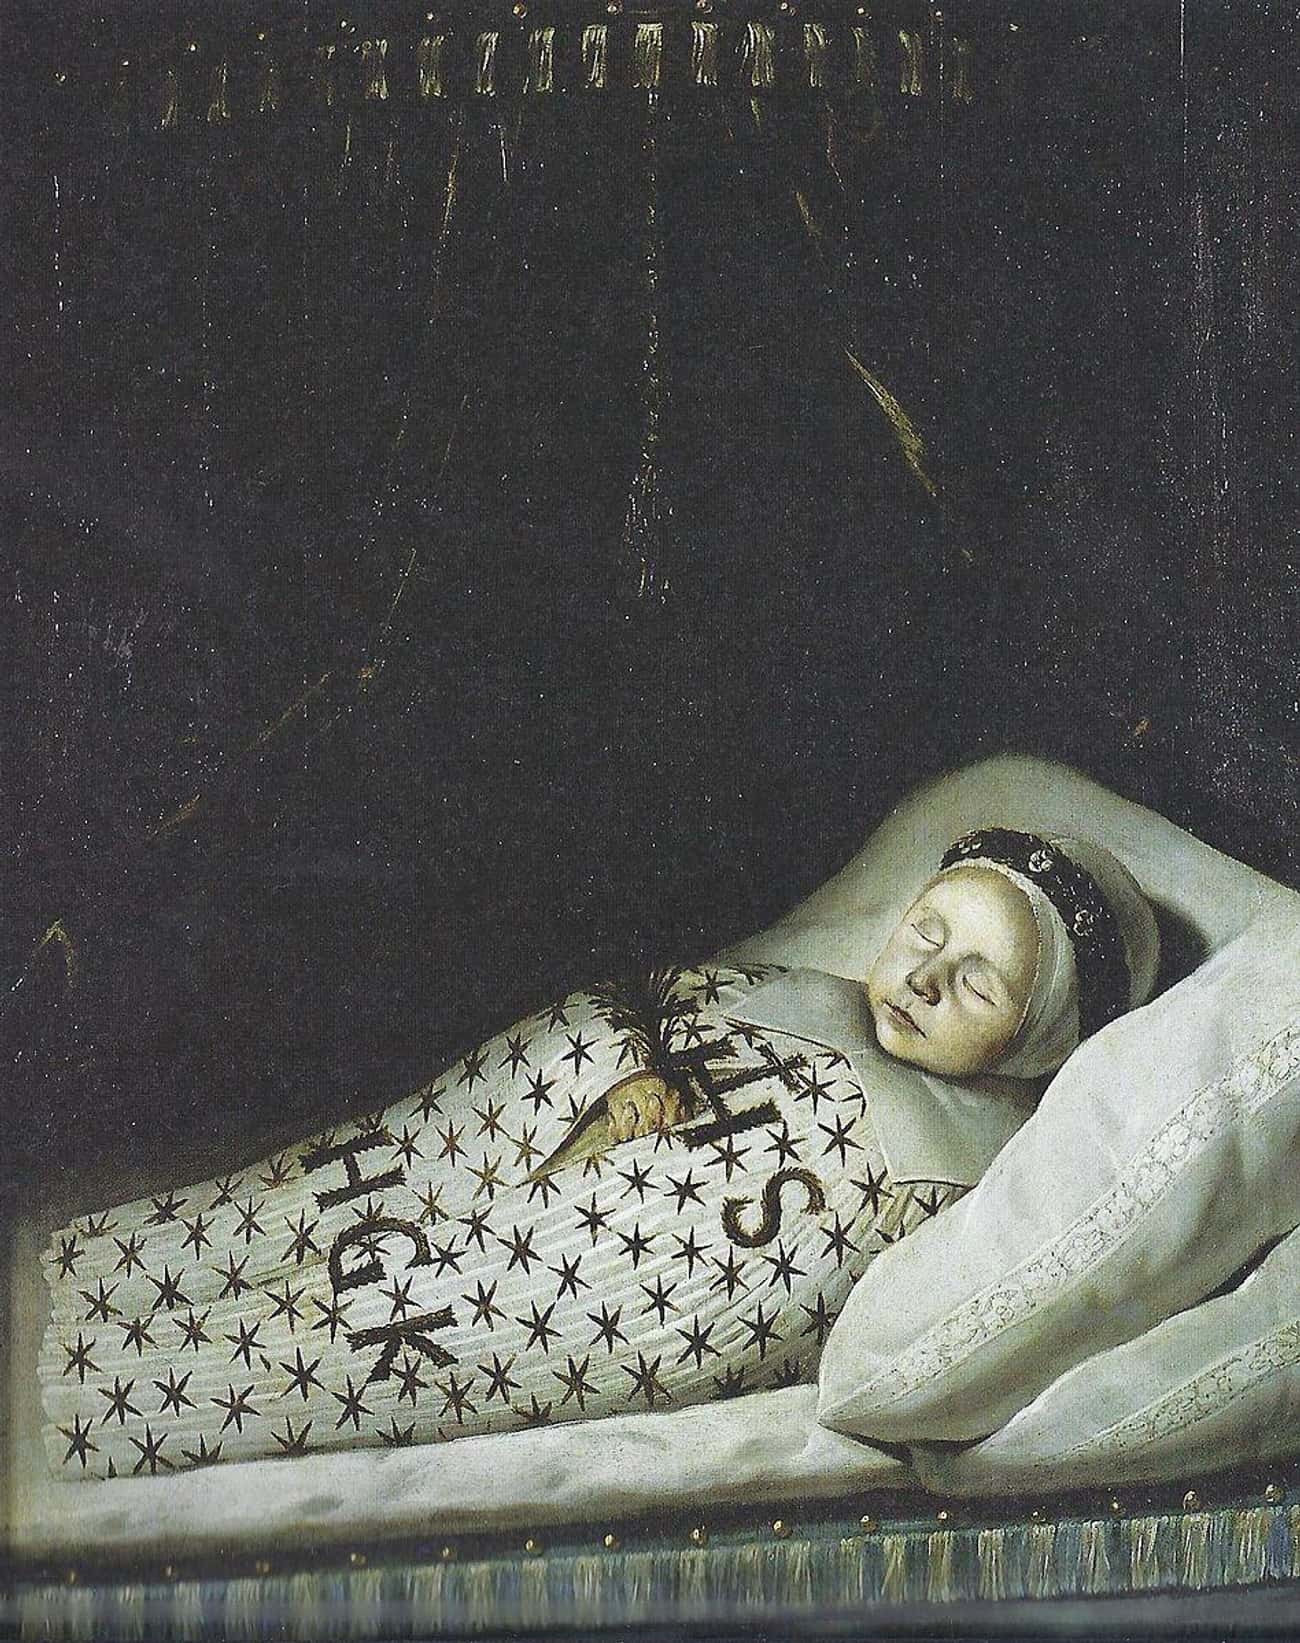 'Portrait of a dead child wearing a mourning wreath around its head' By Jan de Stomme, 1654